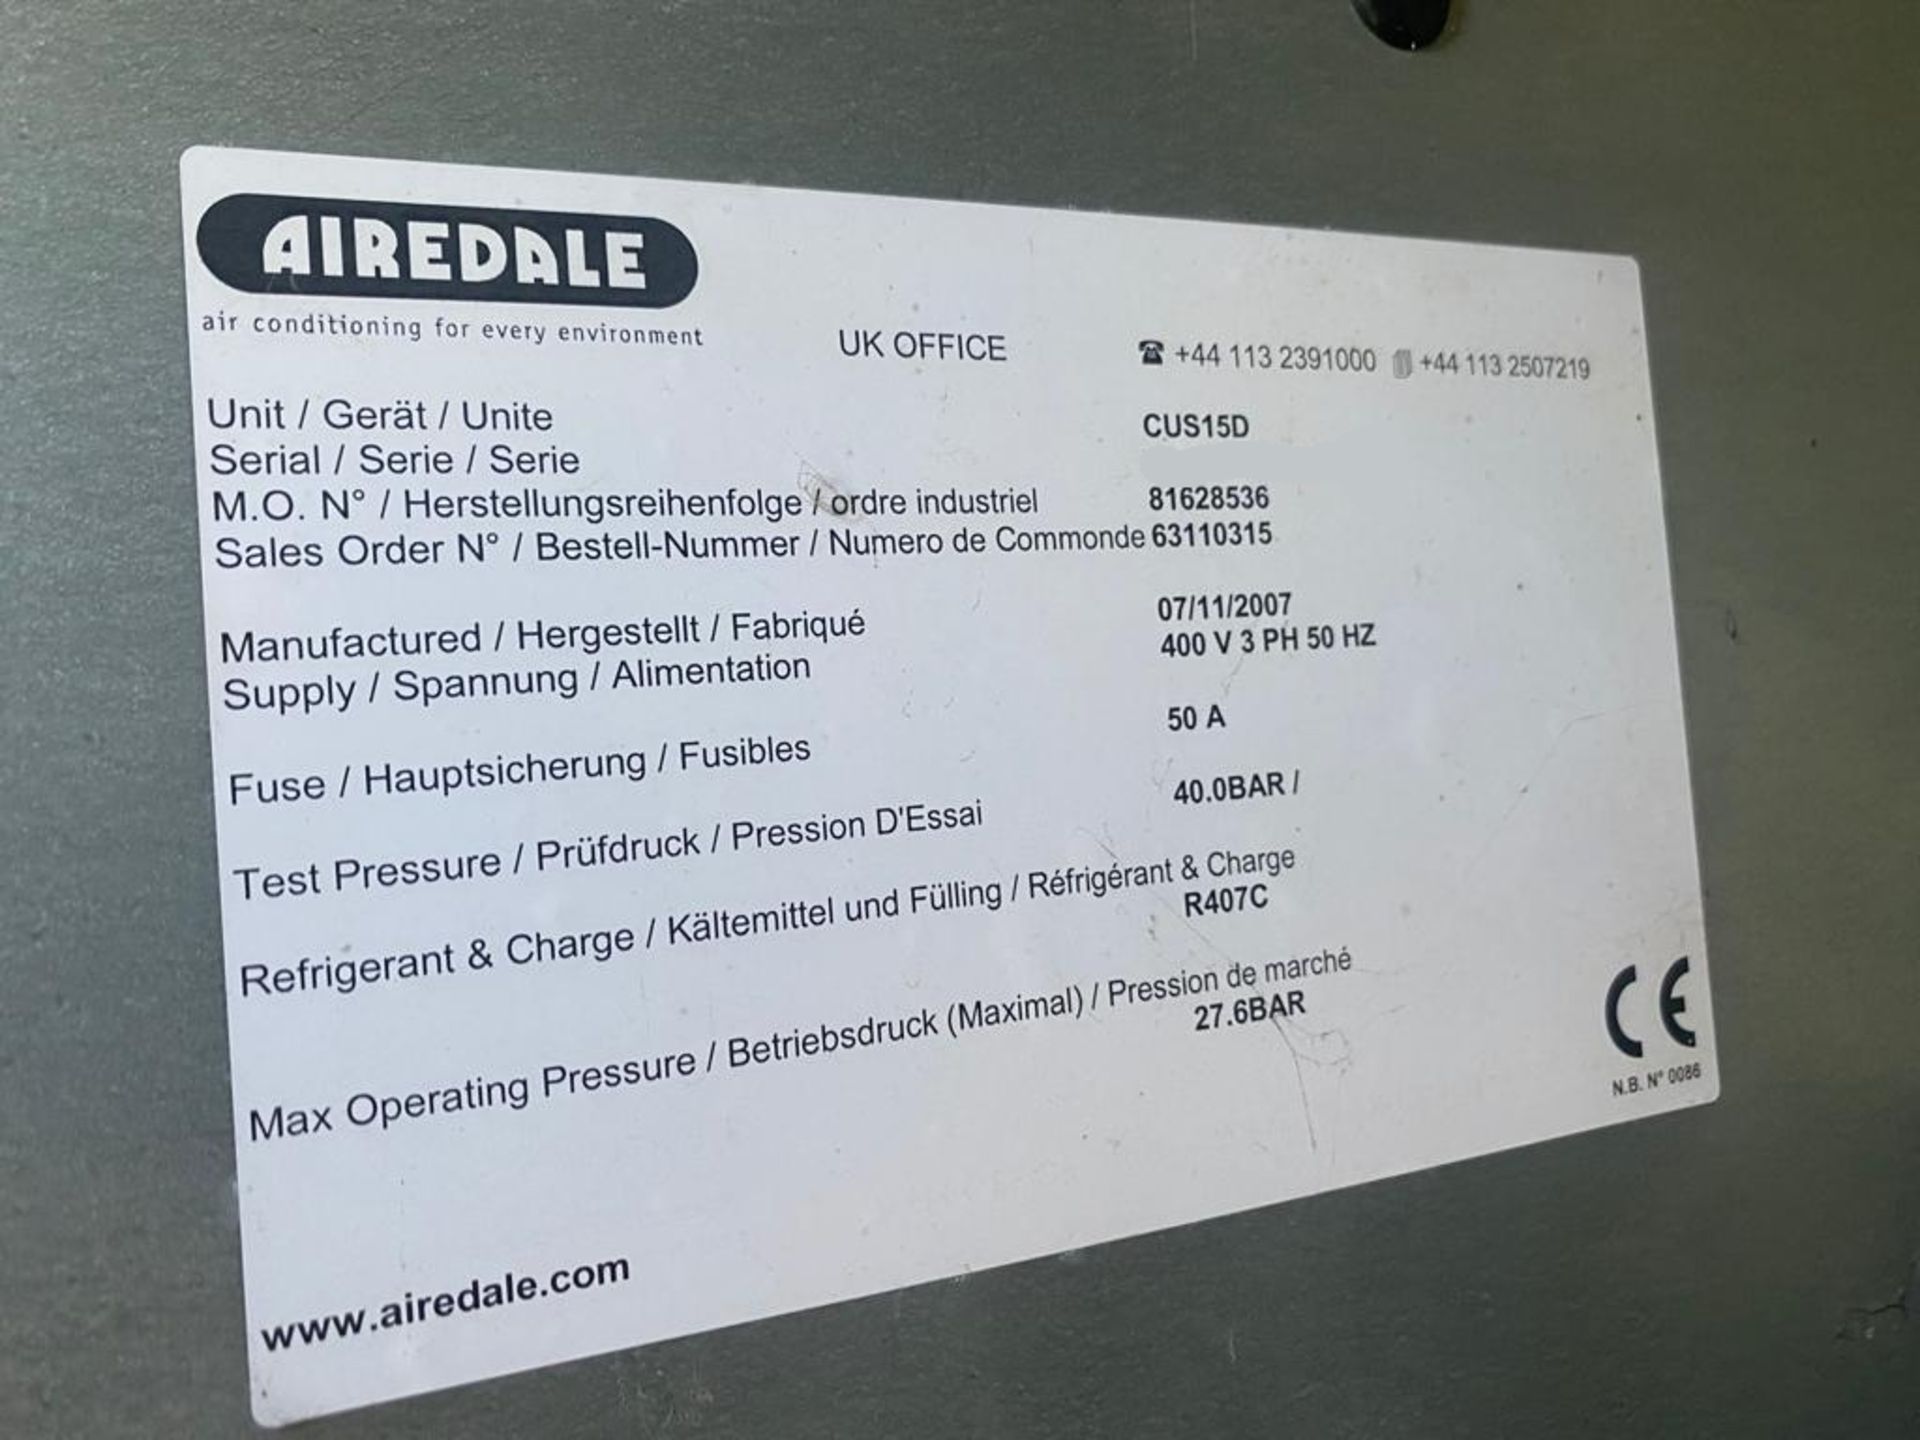 Airedale TWIN FAN CHILLER UNIT, overall size 2.3m x 1.1m x 1.3m high UNDERSTOOD TO BE MODEL - Image 6 of 6